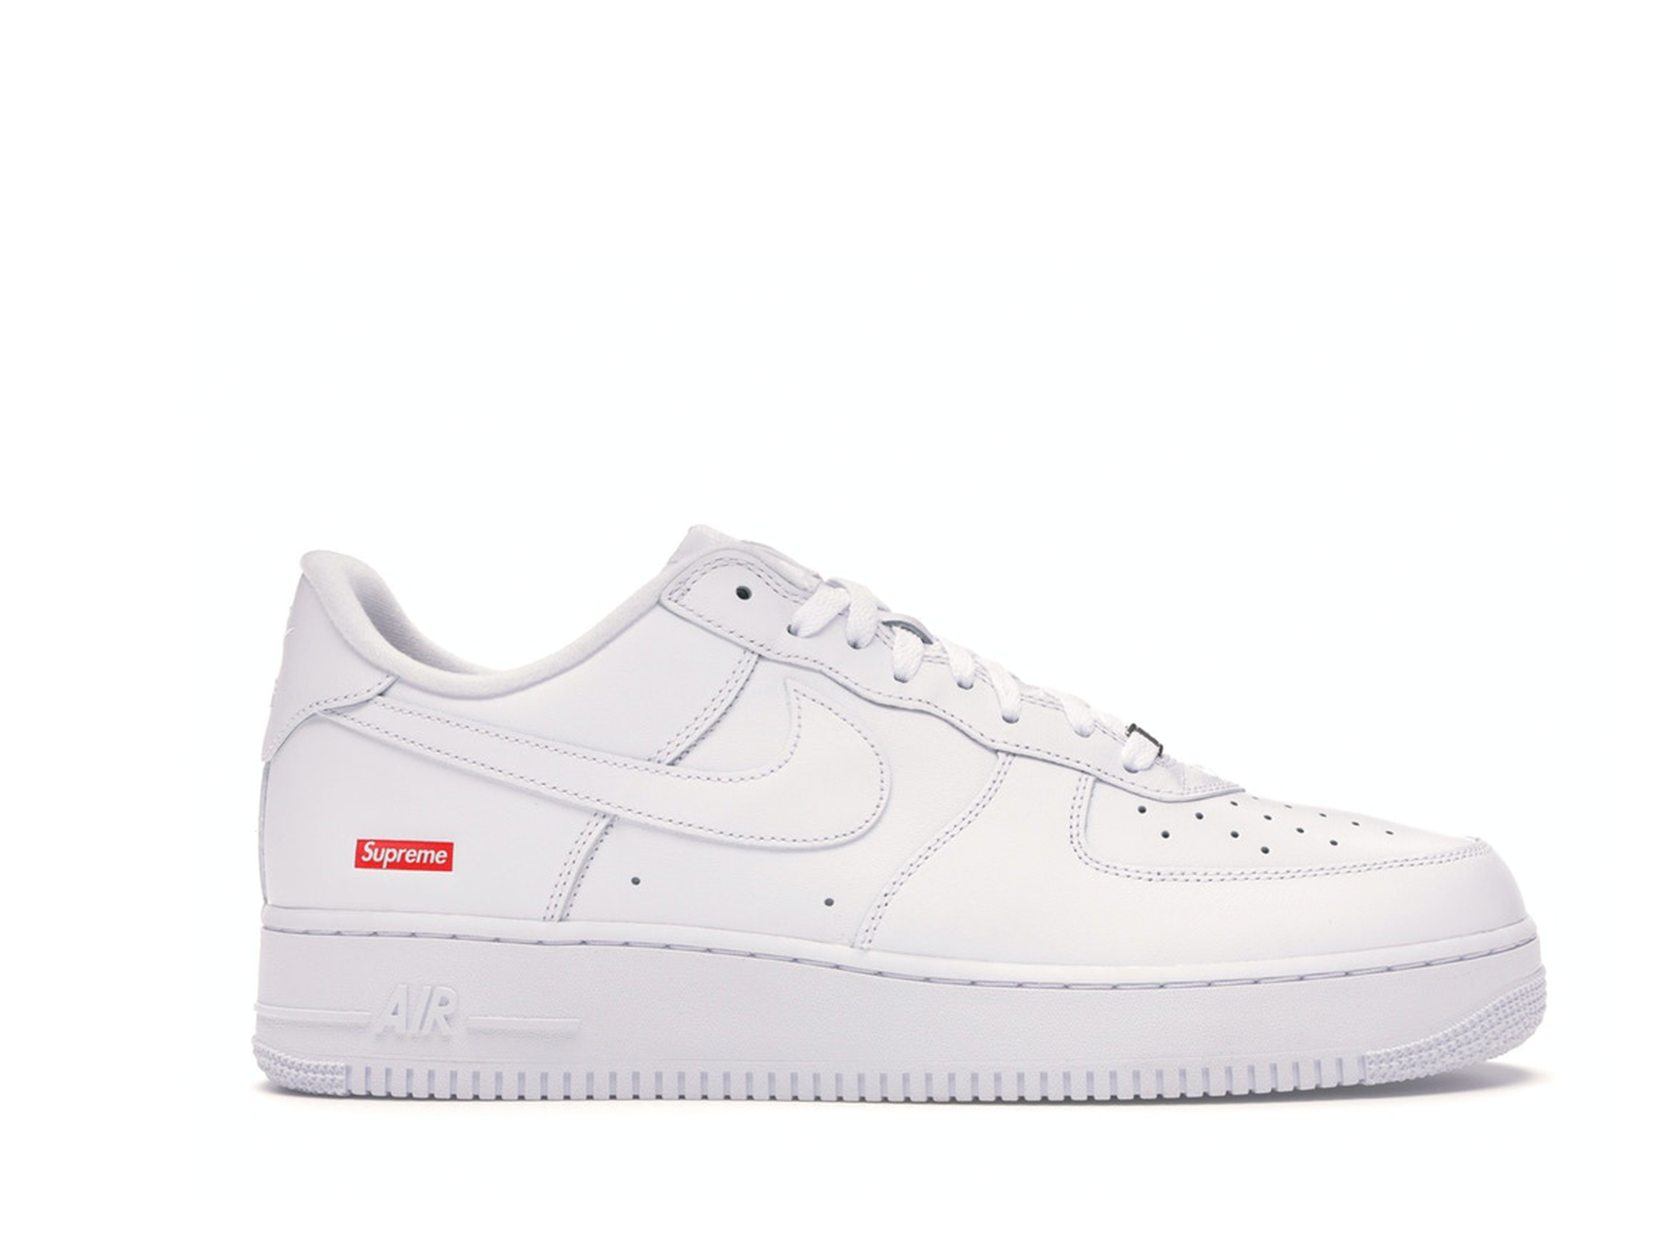 Double Boxed  229.99 Nike Air Force 1 Low Supreme Box Logo White Double Boxed